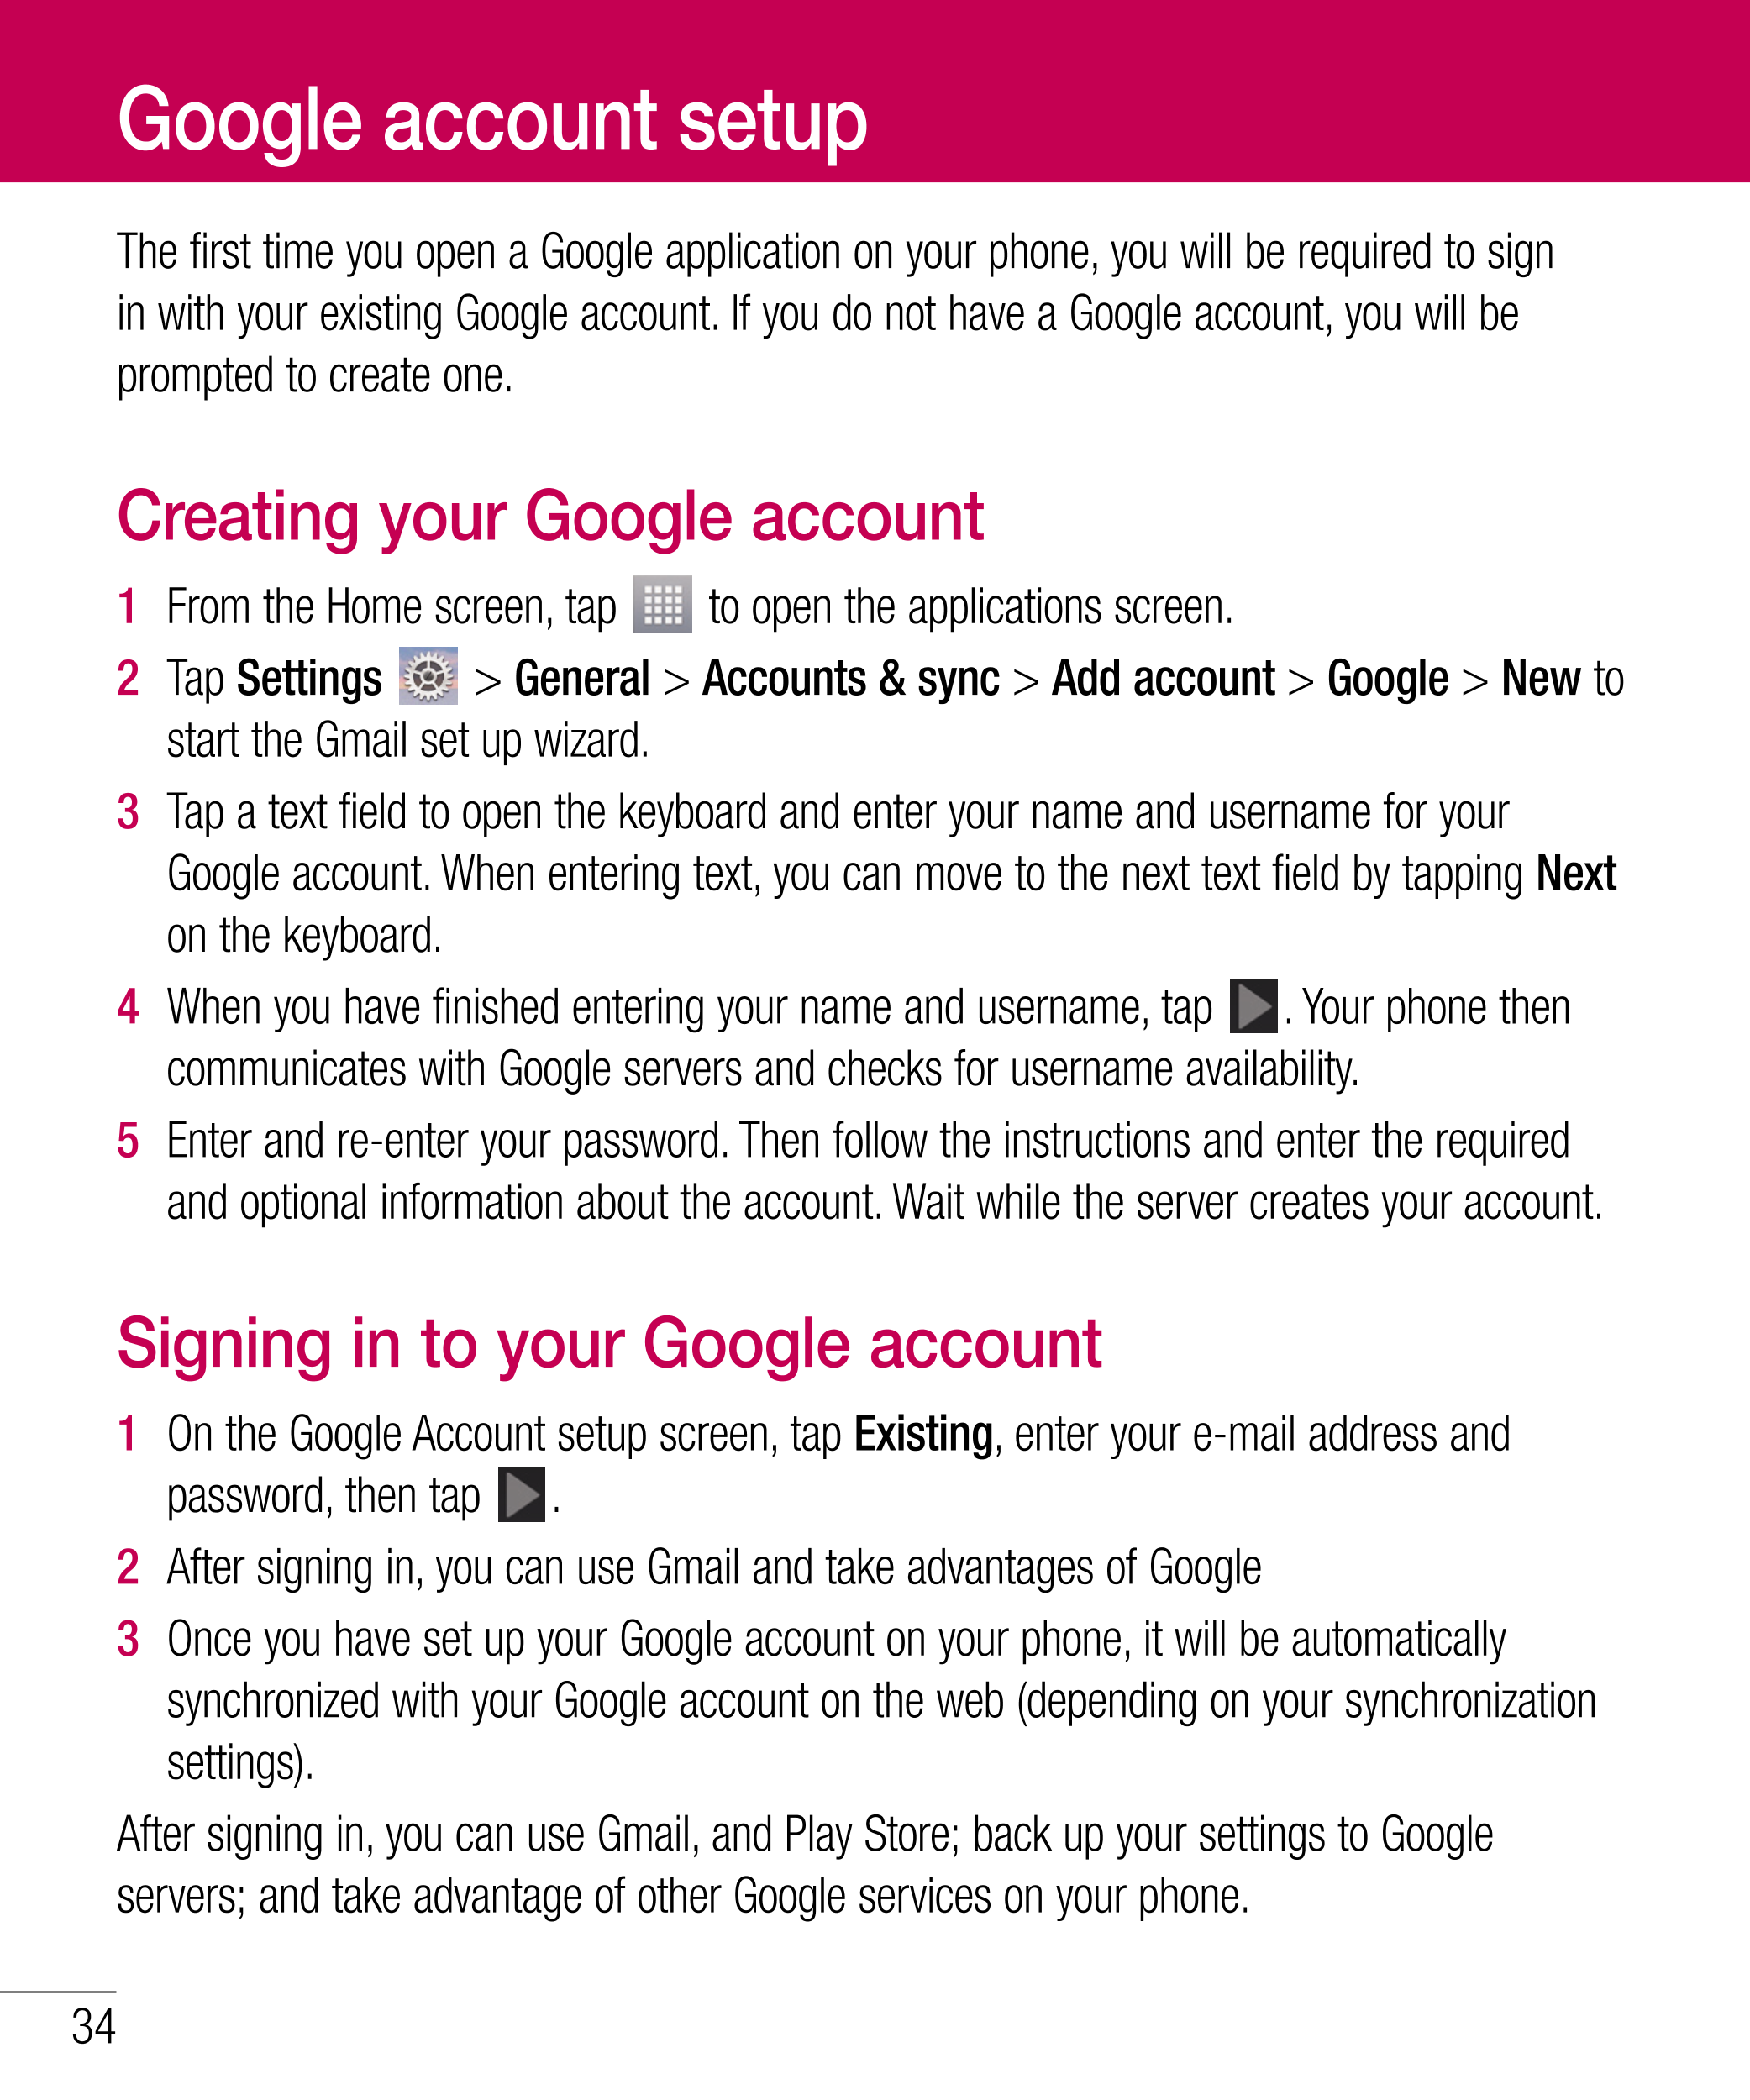 Google account setup
The first time you open a Google application on your phone, you will be required to sign 
in with your exis